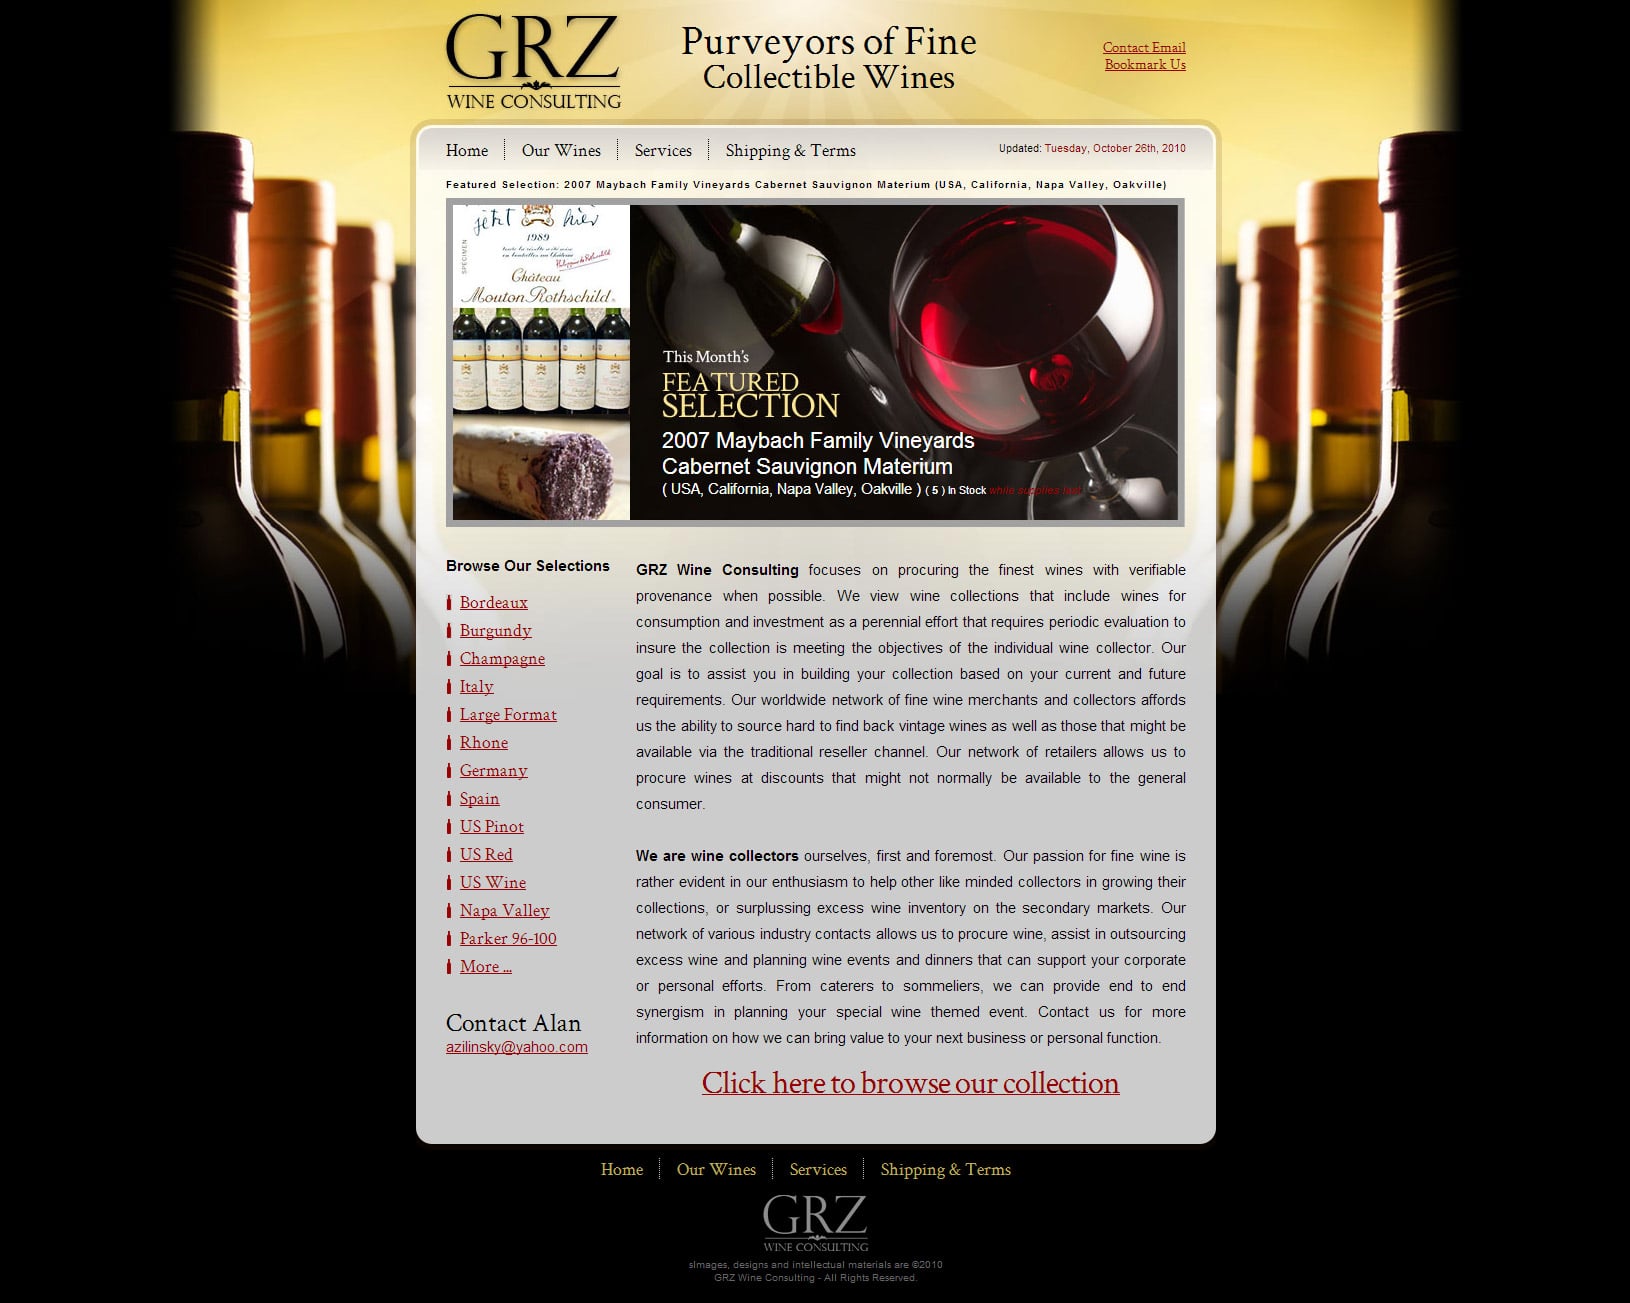 GRZ Wine Consulting